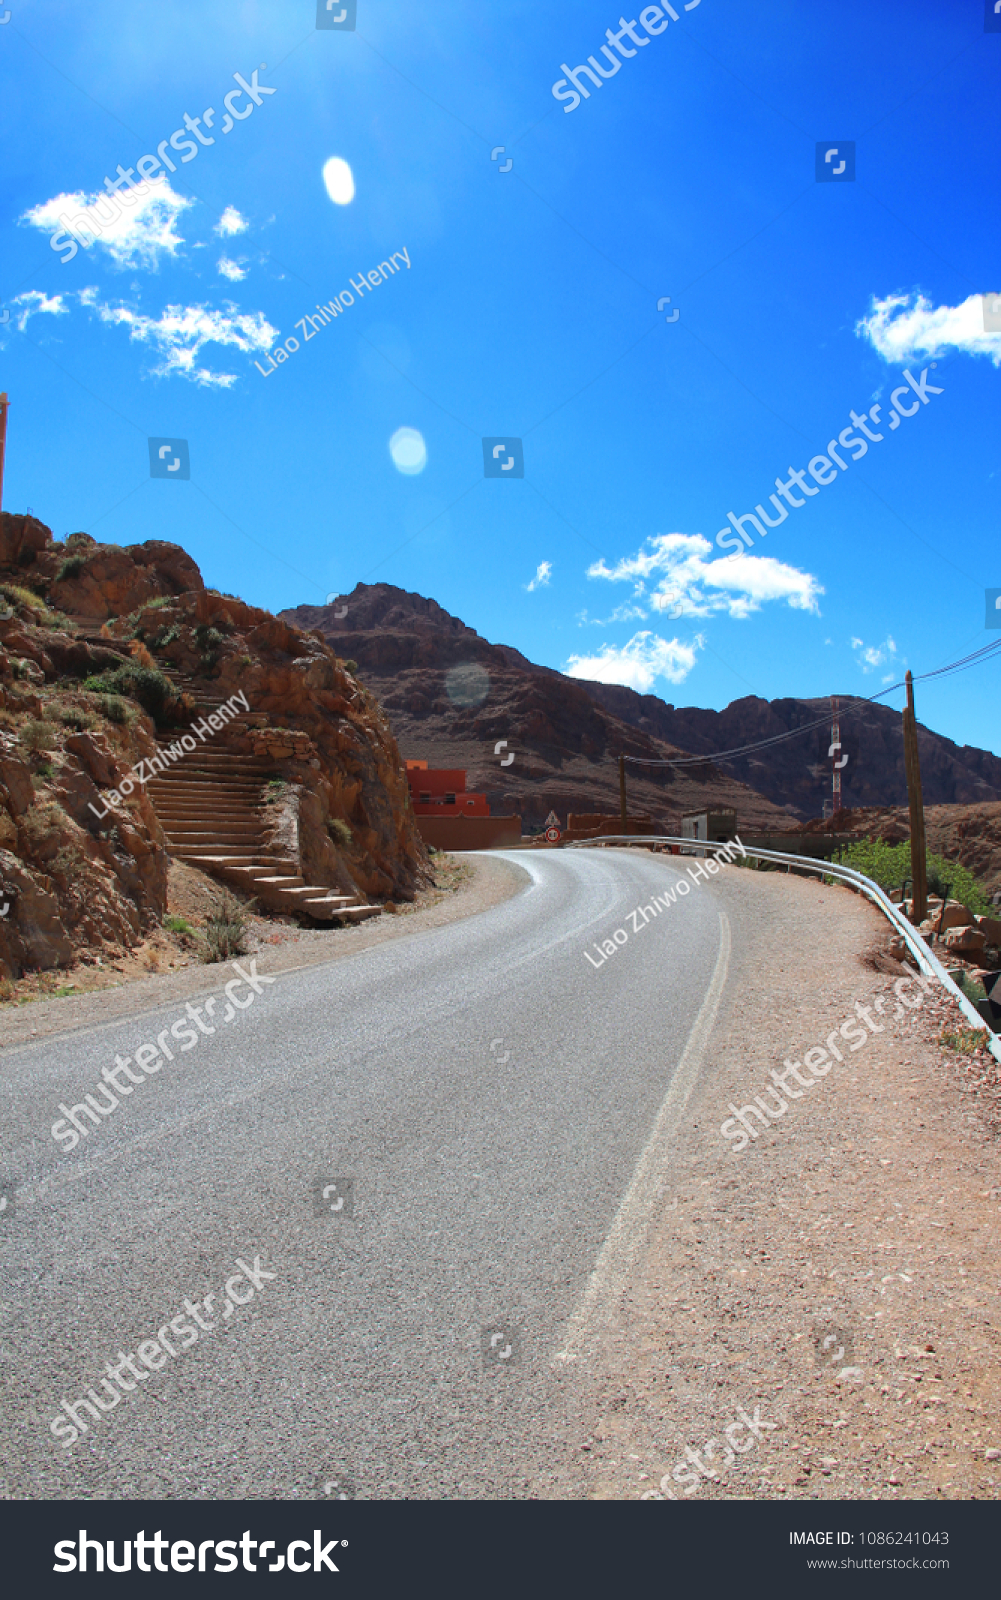 The roads and landscape around the Todgha Gorges (Todgha Gorges, Morocco) #1086241043